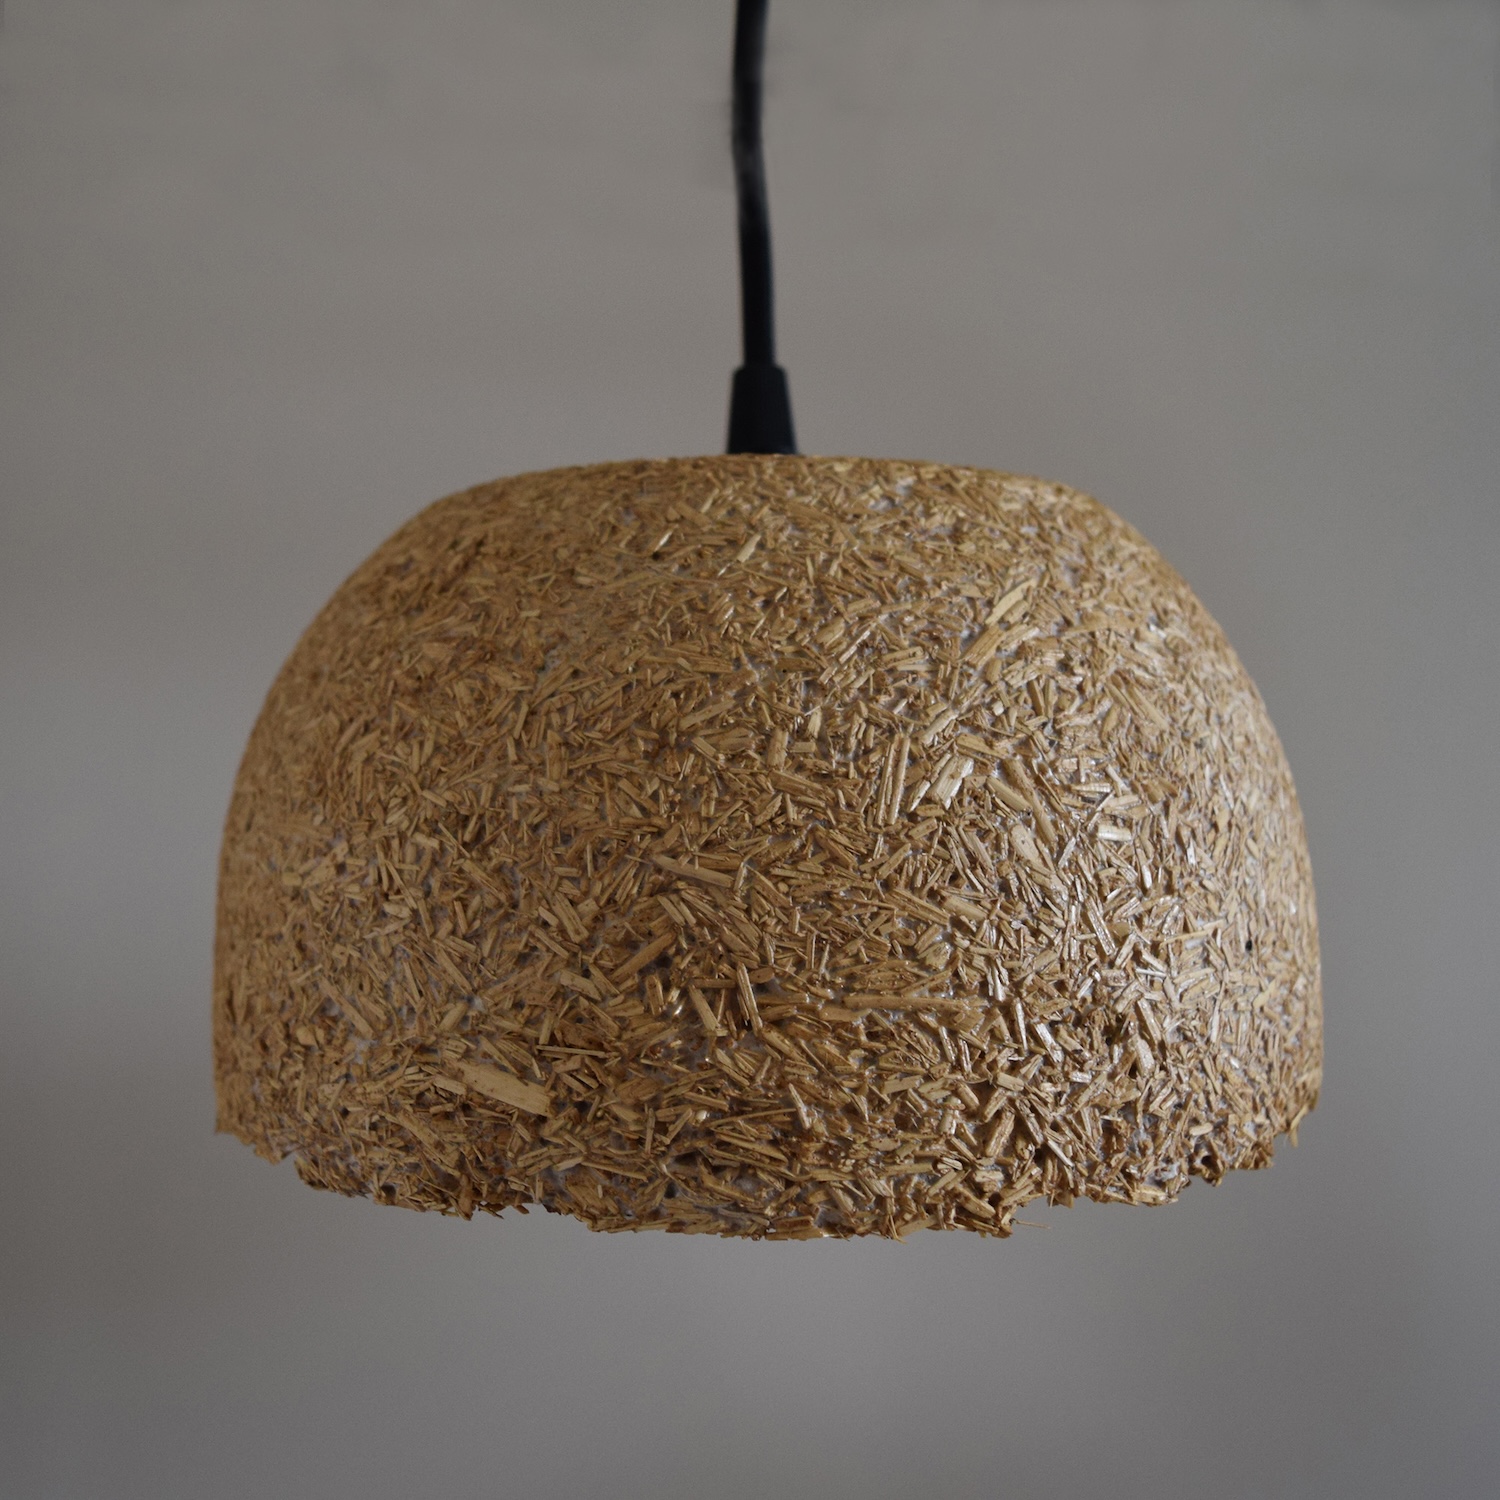 a light brown pendant lamp with a textured surface.